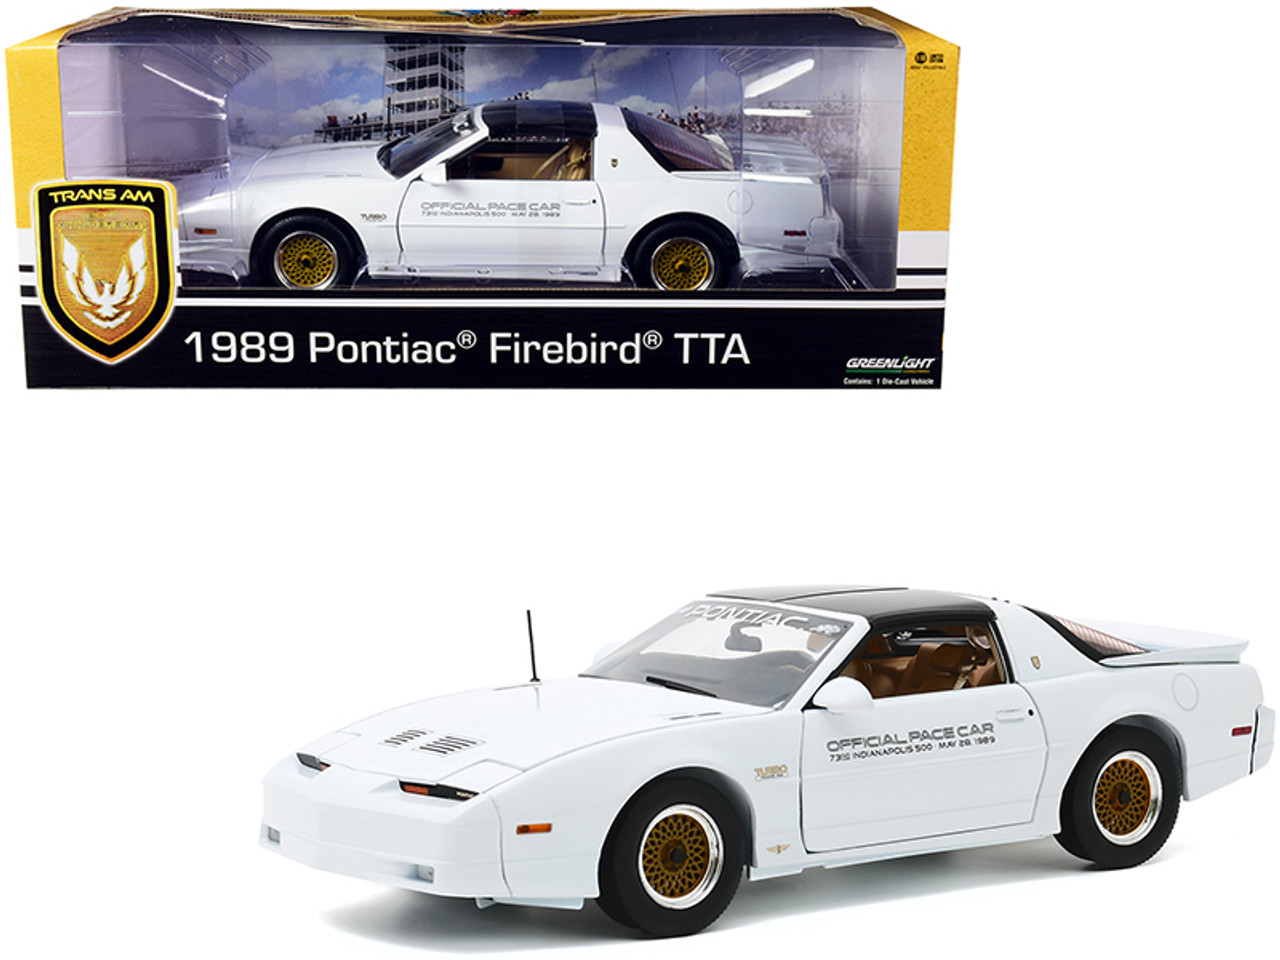 1989 Pontiac Firebird Turbo Trans Am TTA Official Pace Car White "73rd Indianapolis 500" "Trans Am 20th Anniversary" 1/18 Diecast Model Car by Greenlight